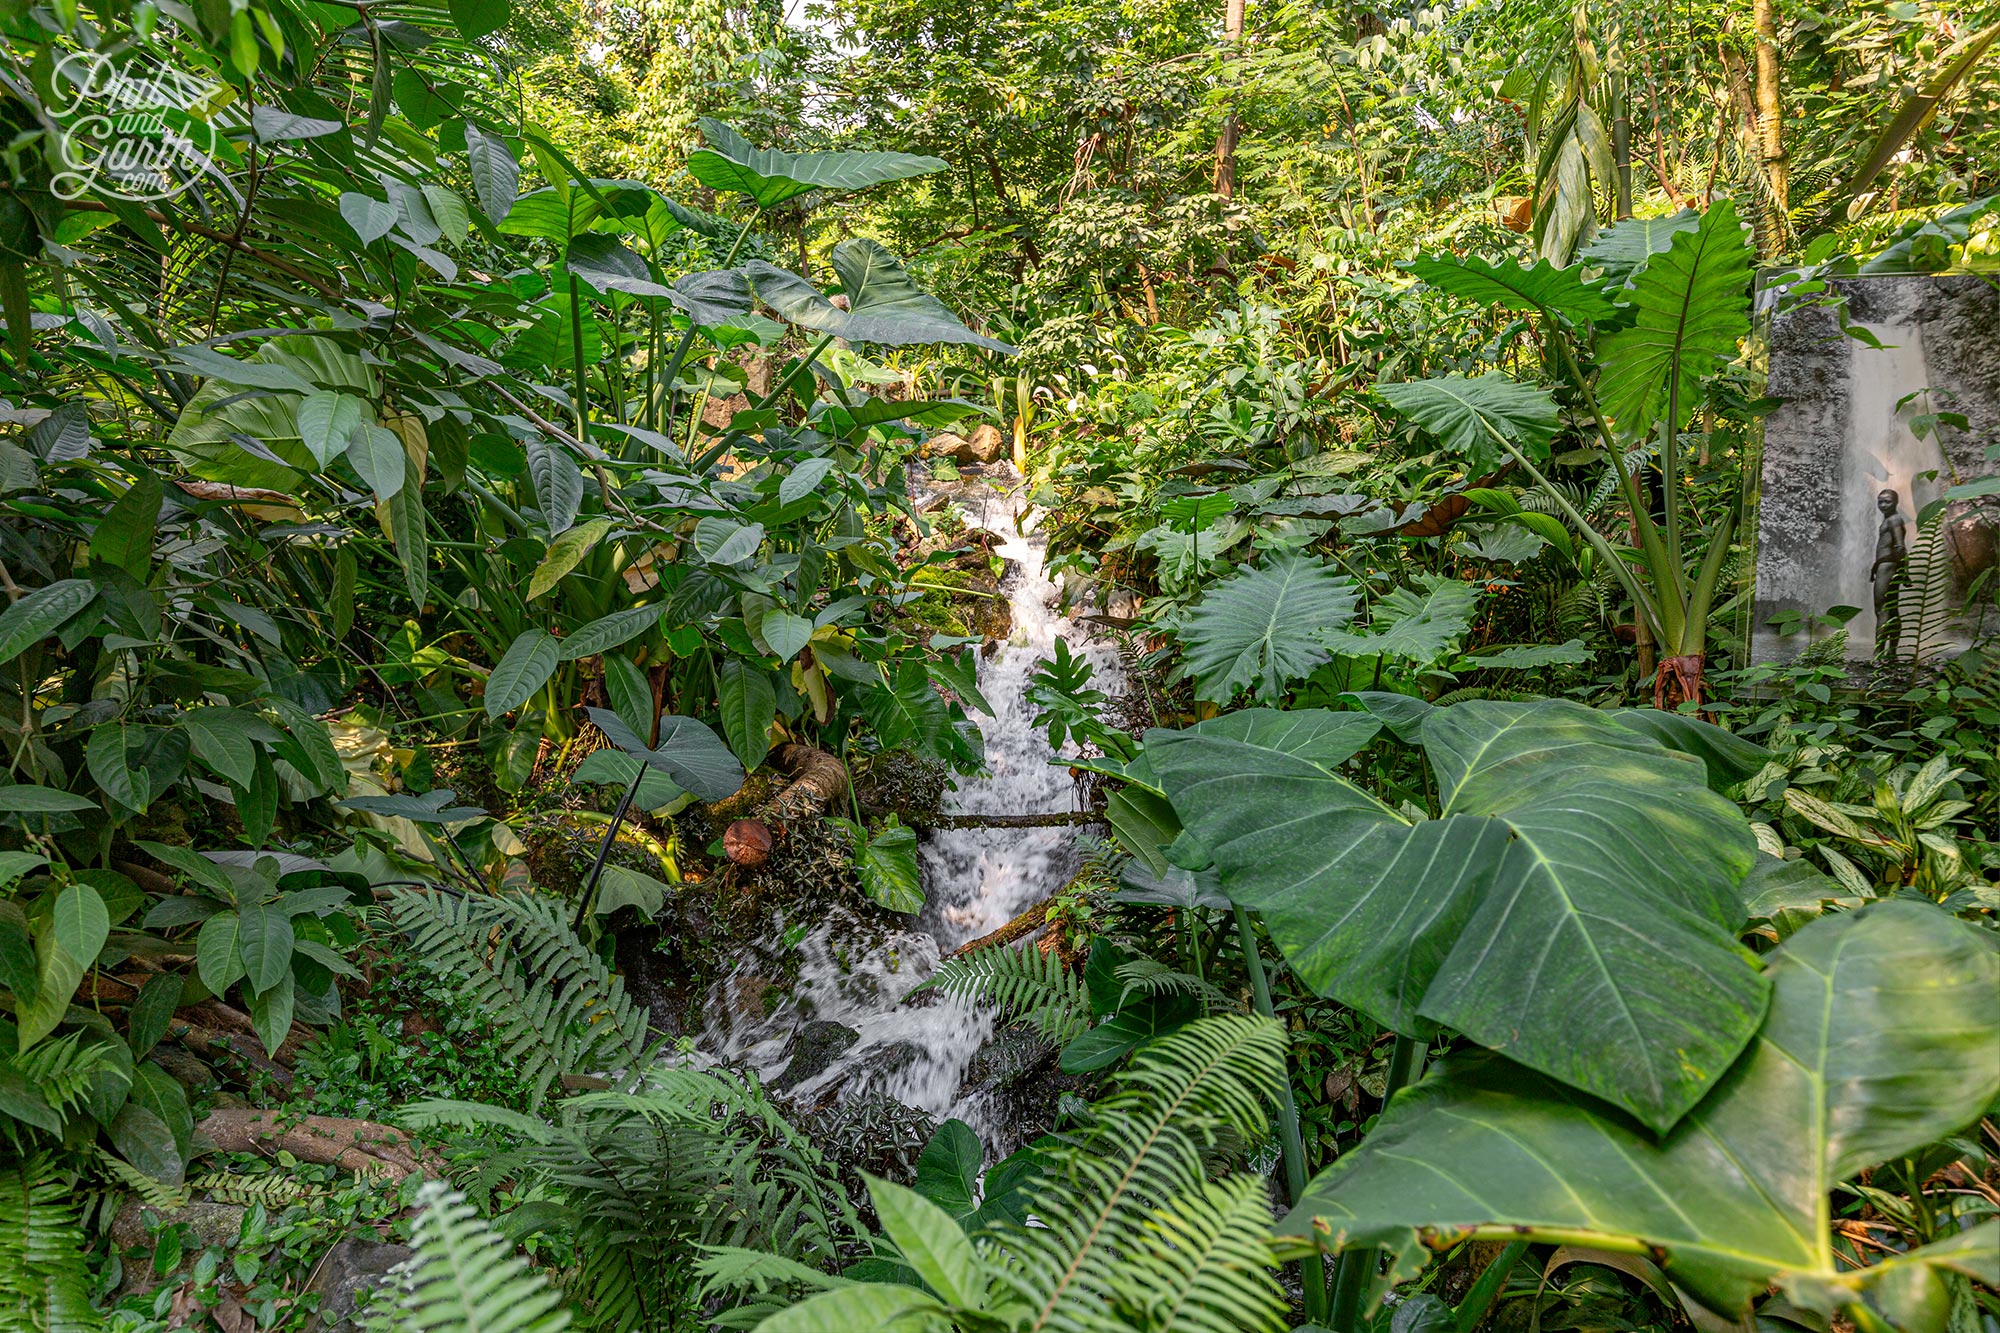 One of the waterfalls inside the rainforest biome